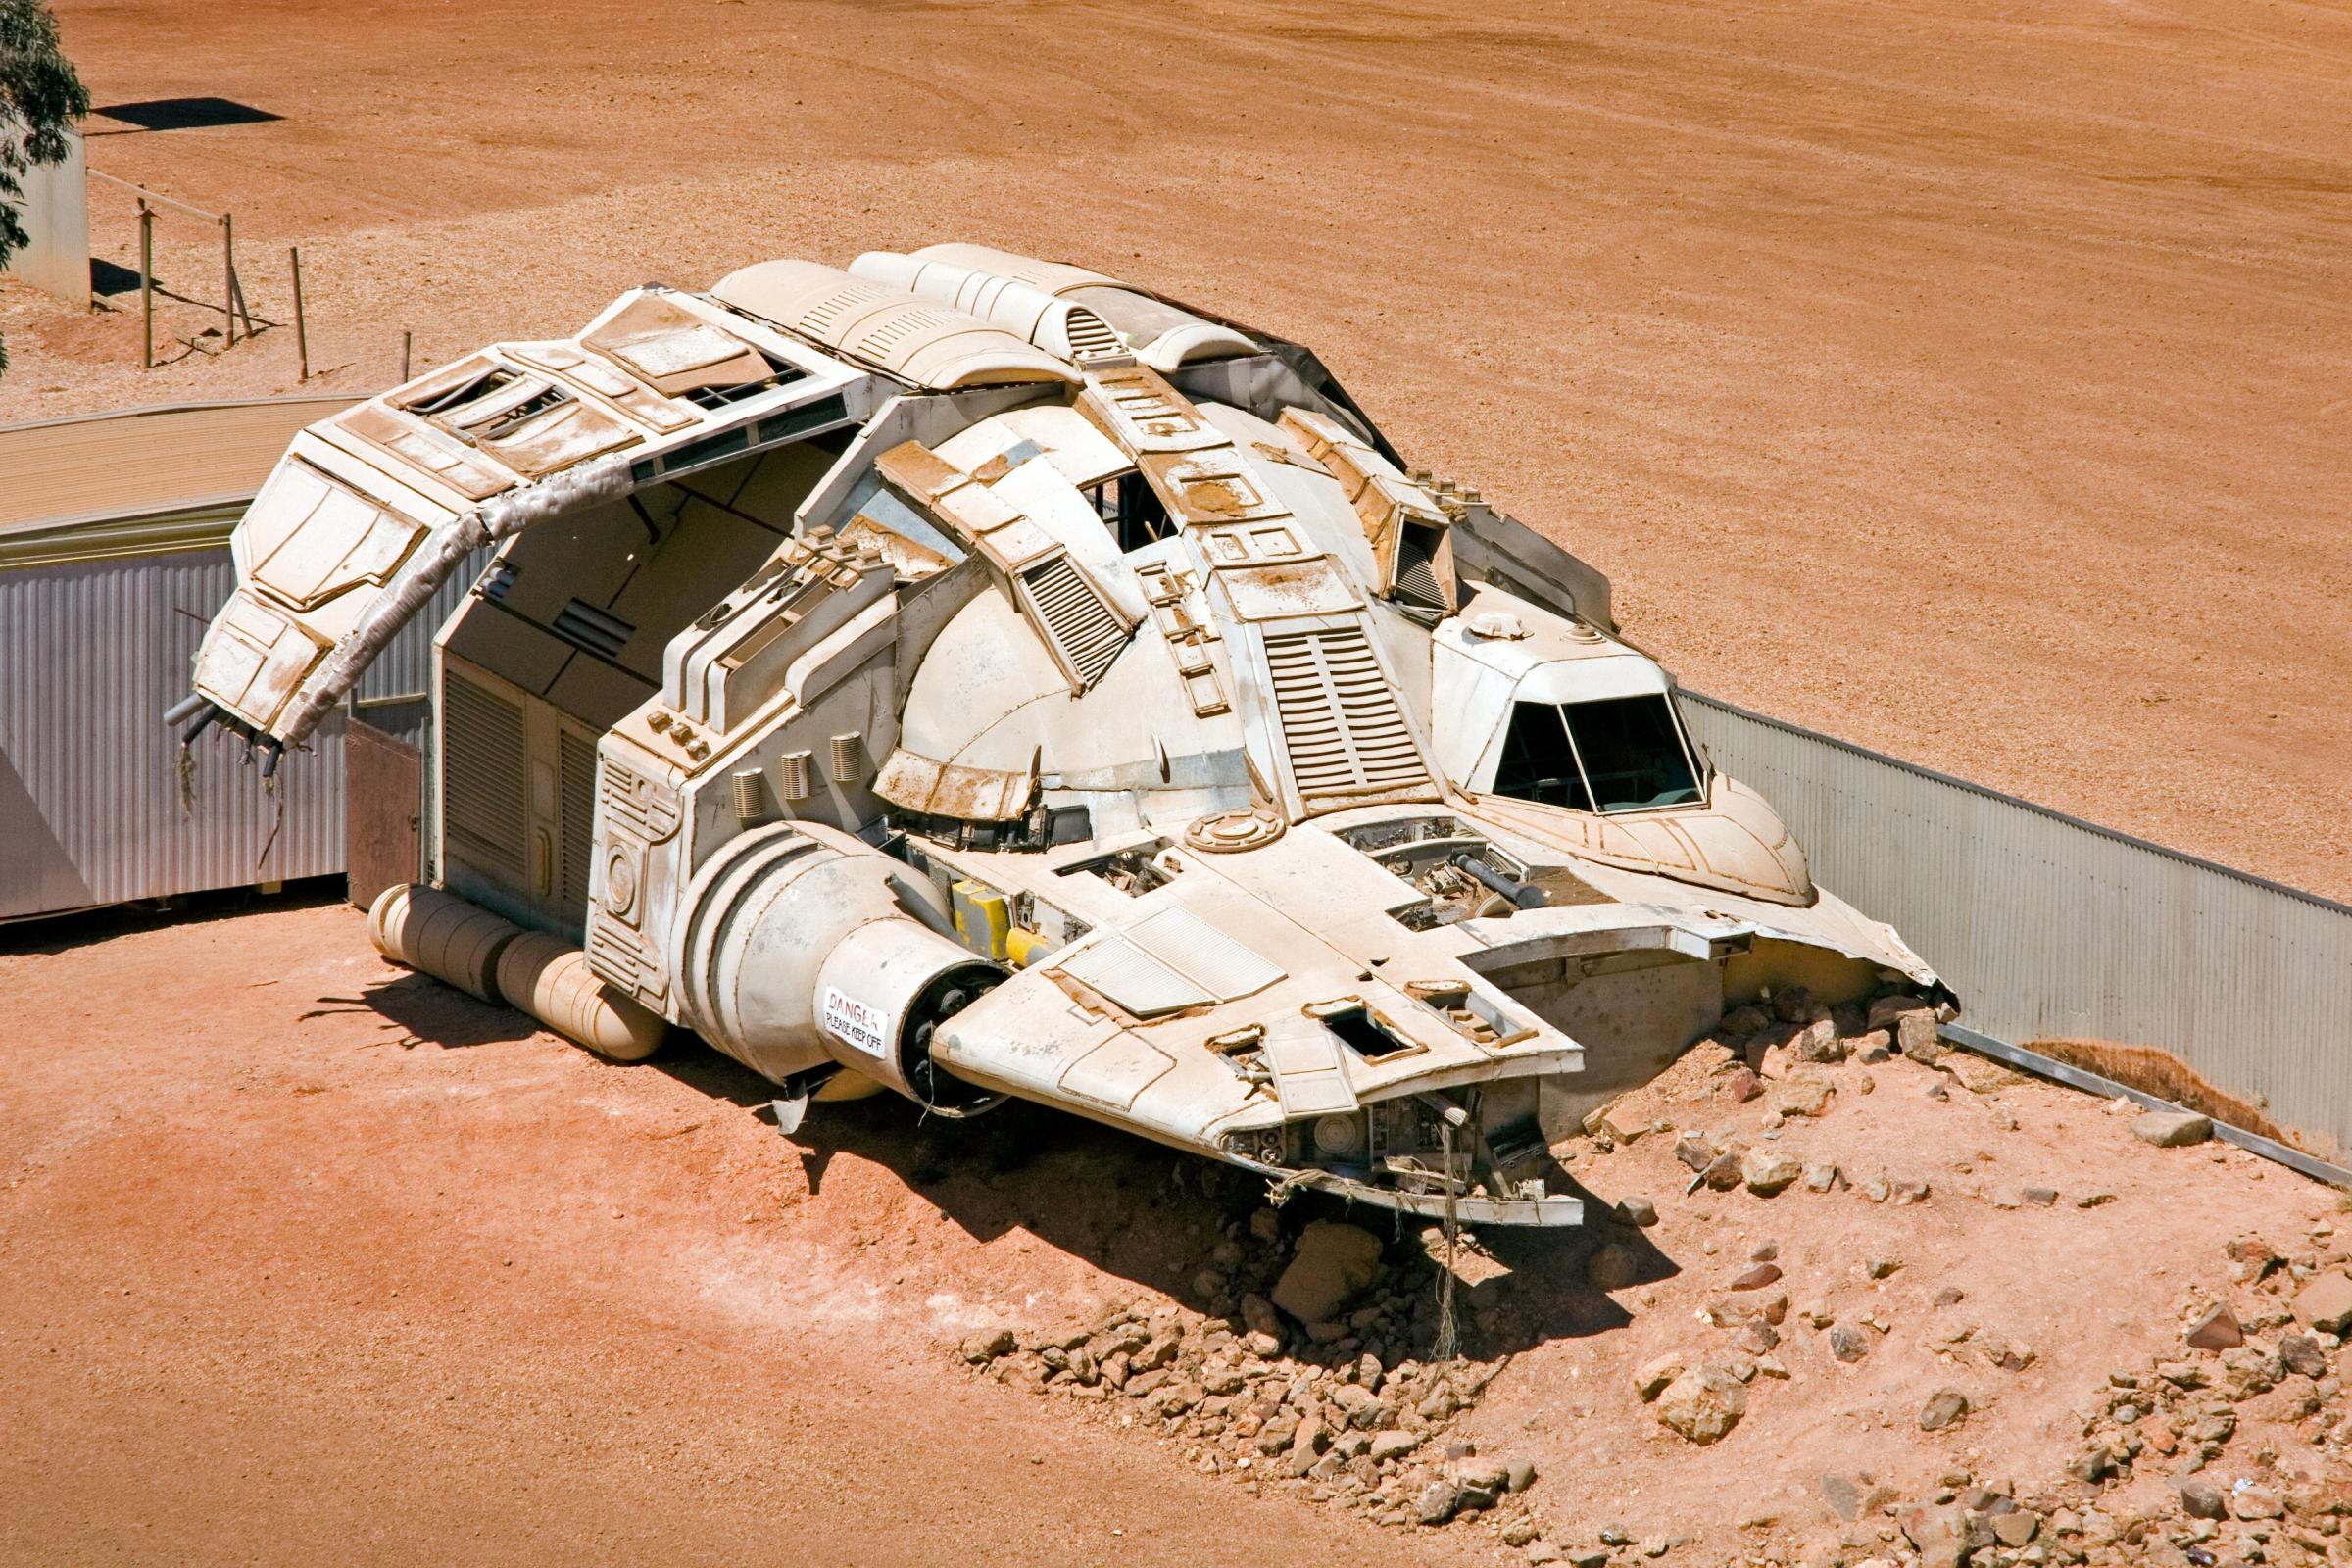 Star Wars props now sell for thousands of pounds. Photo: Pixabay